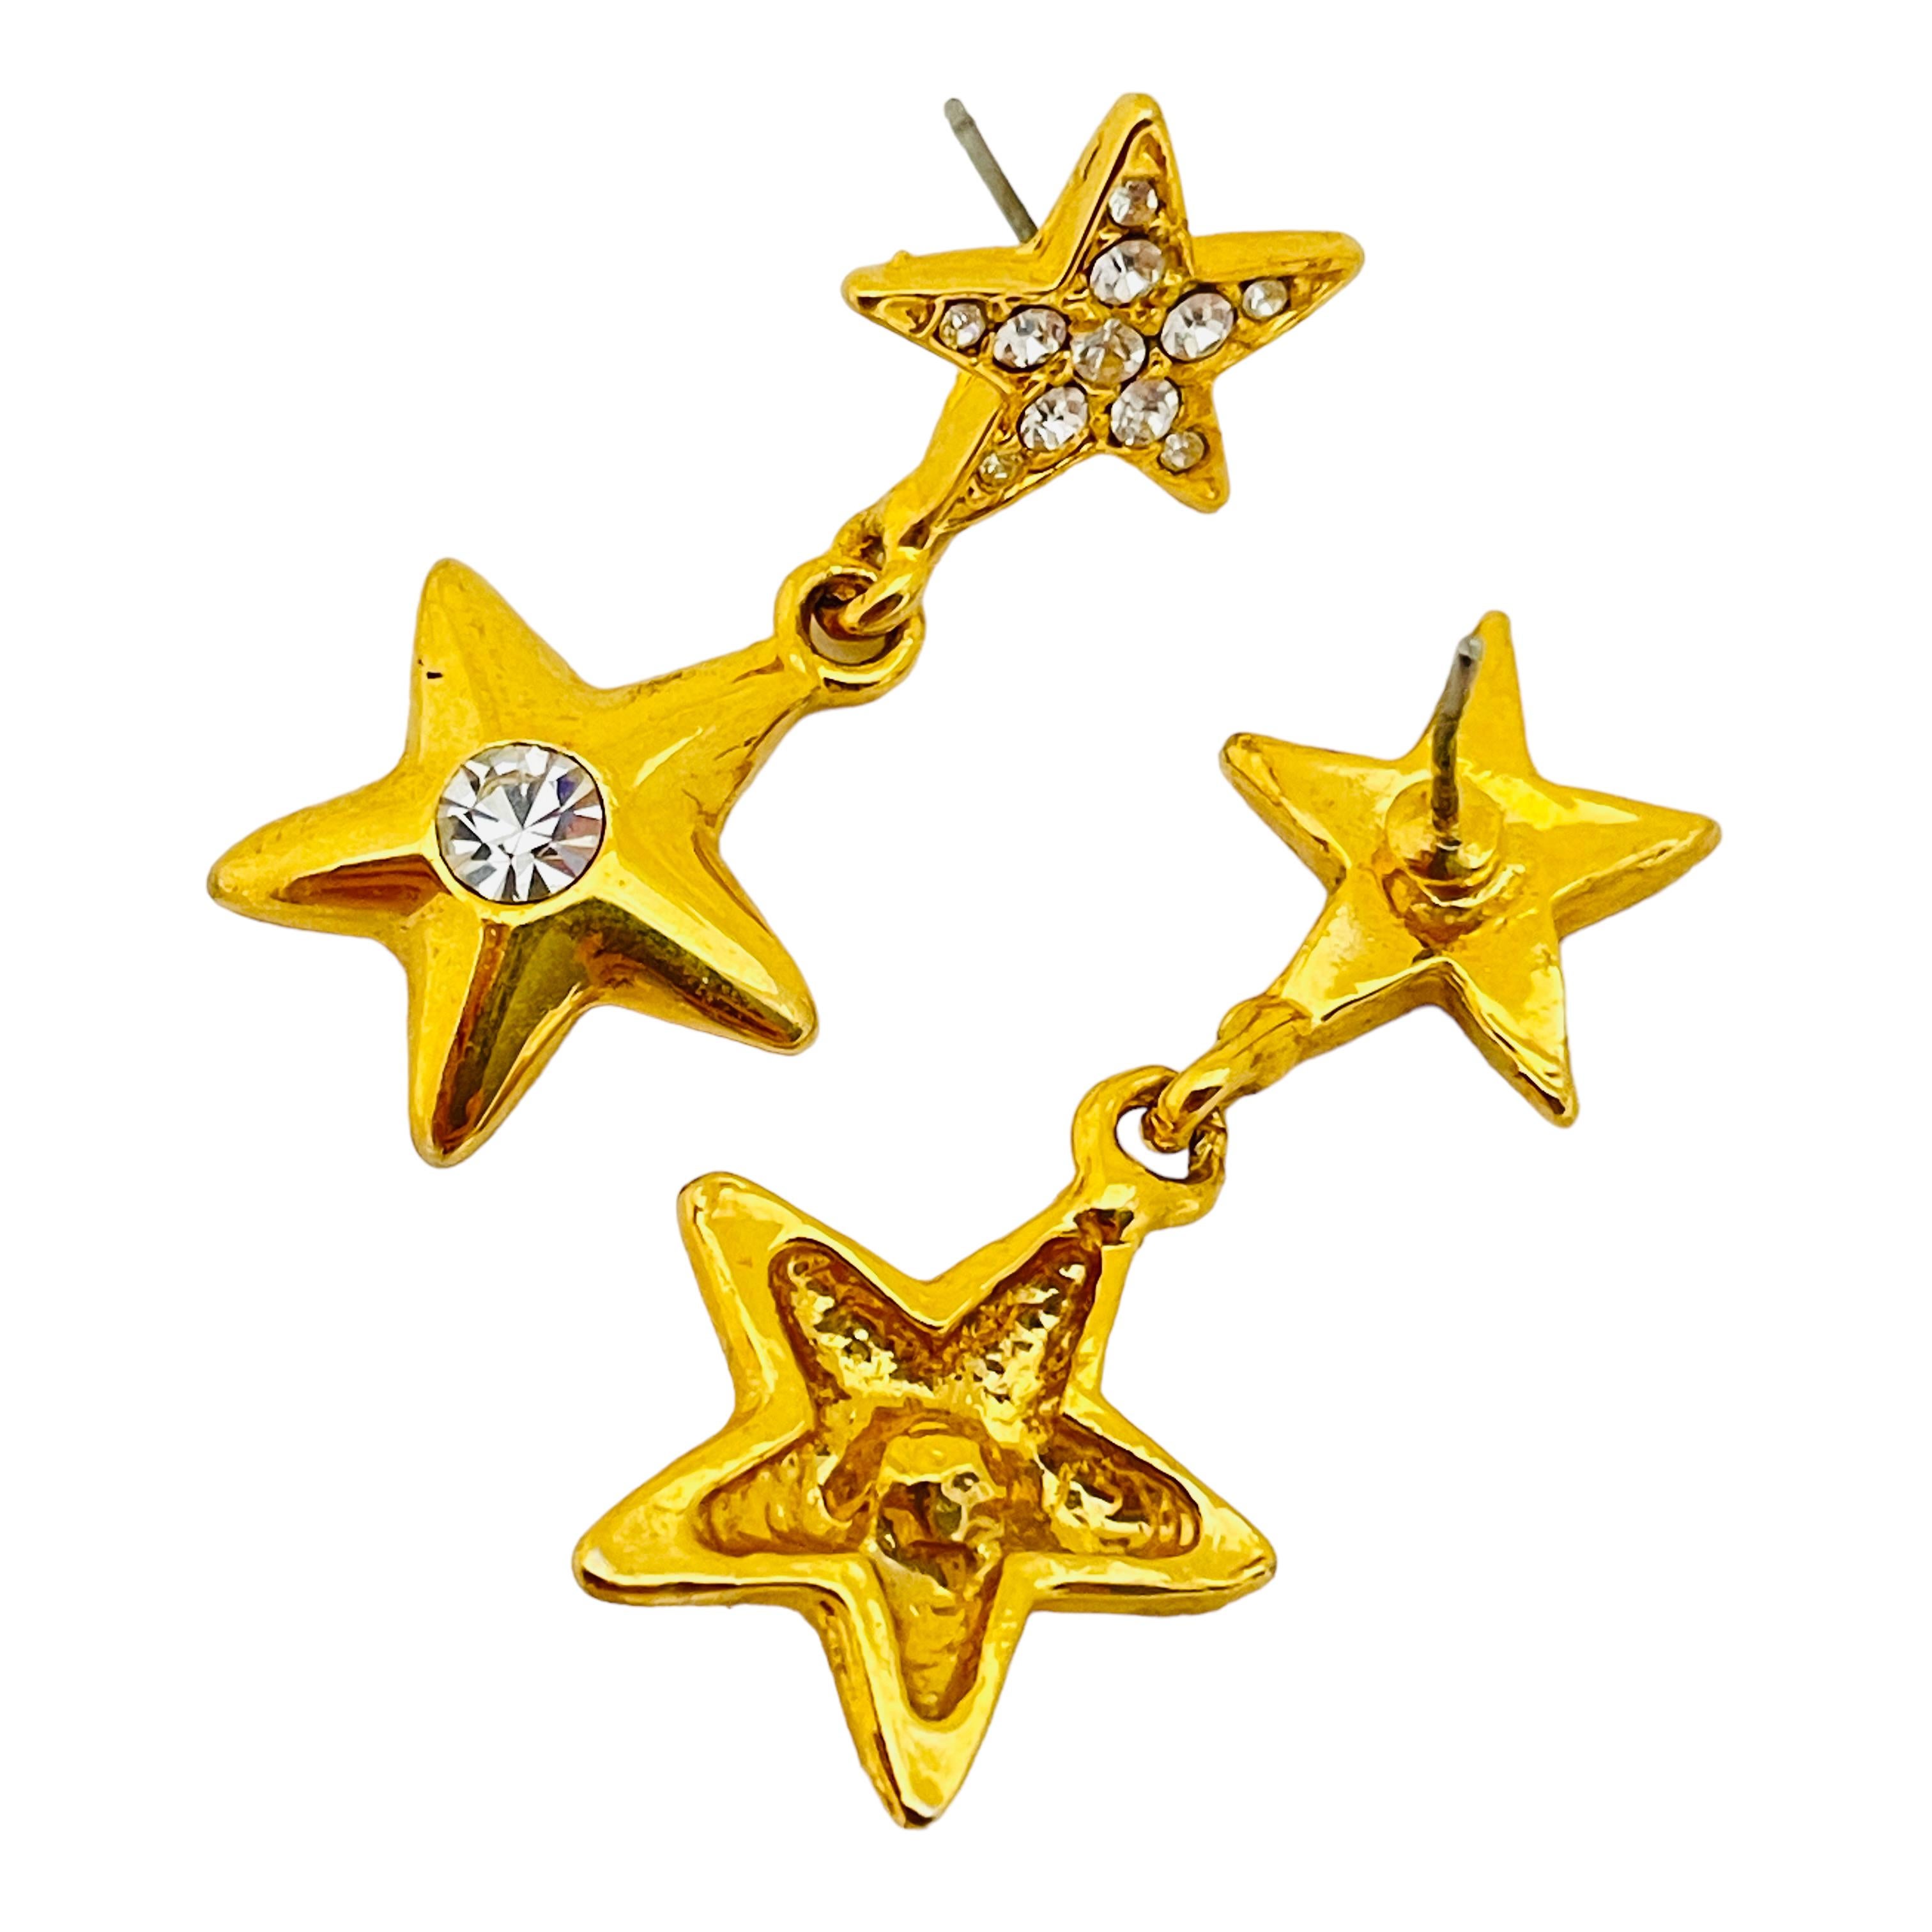 Vintage gold rhinestone star designer runway earrings  In Excellent Condition For Sale In Palos Hills, IL